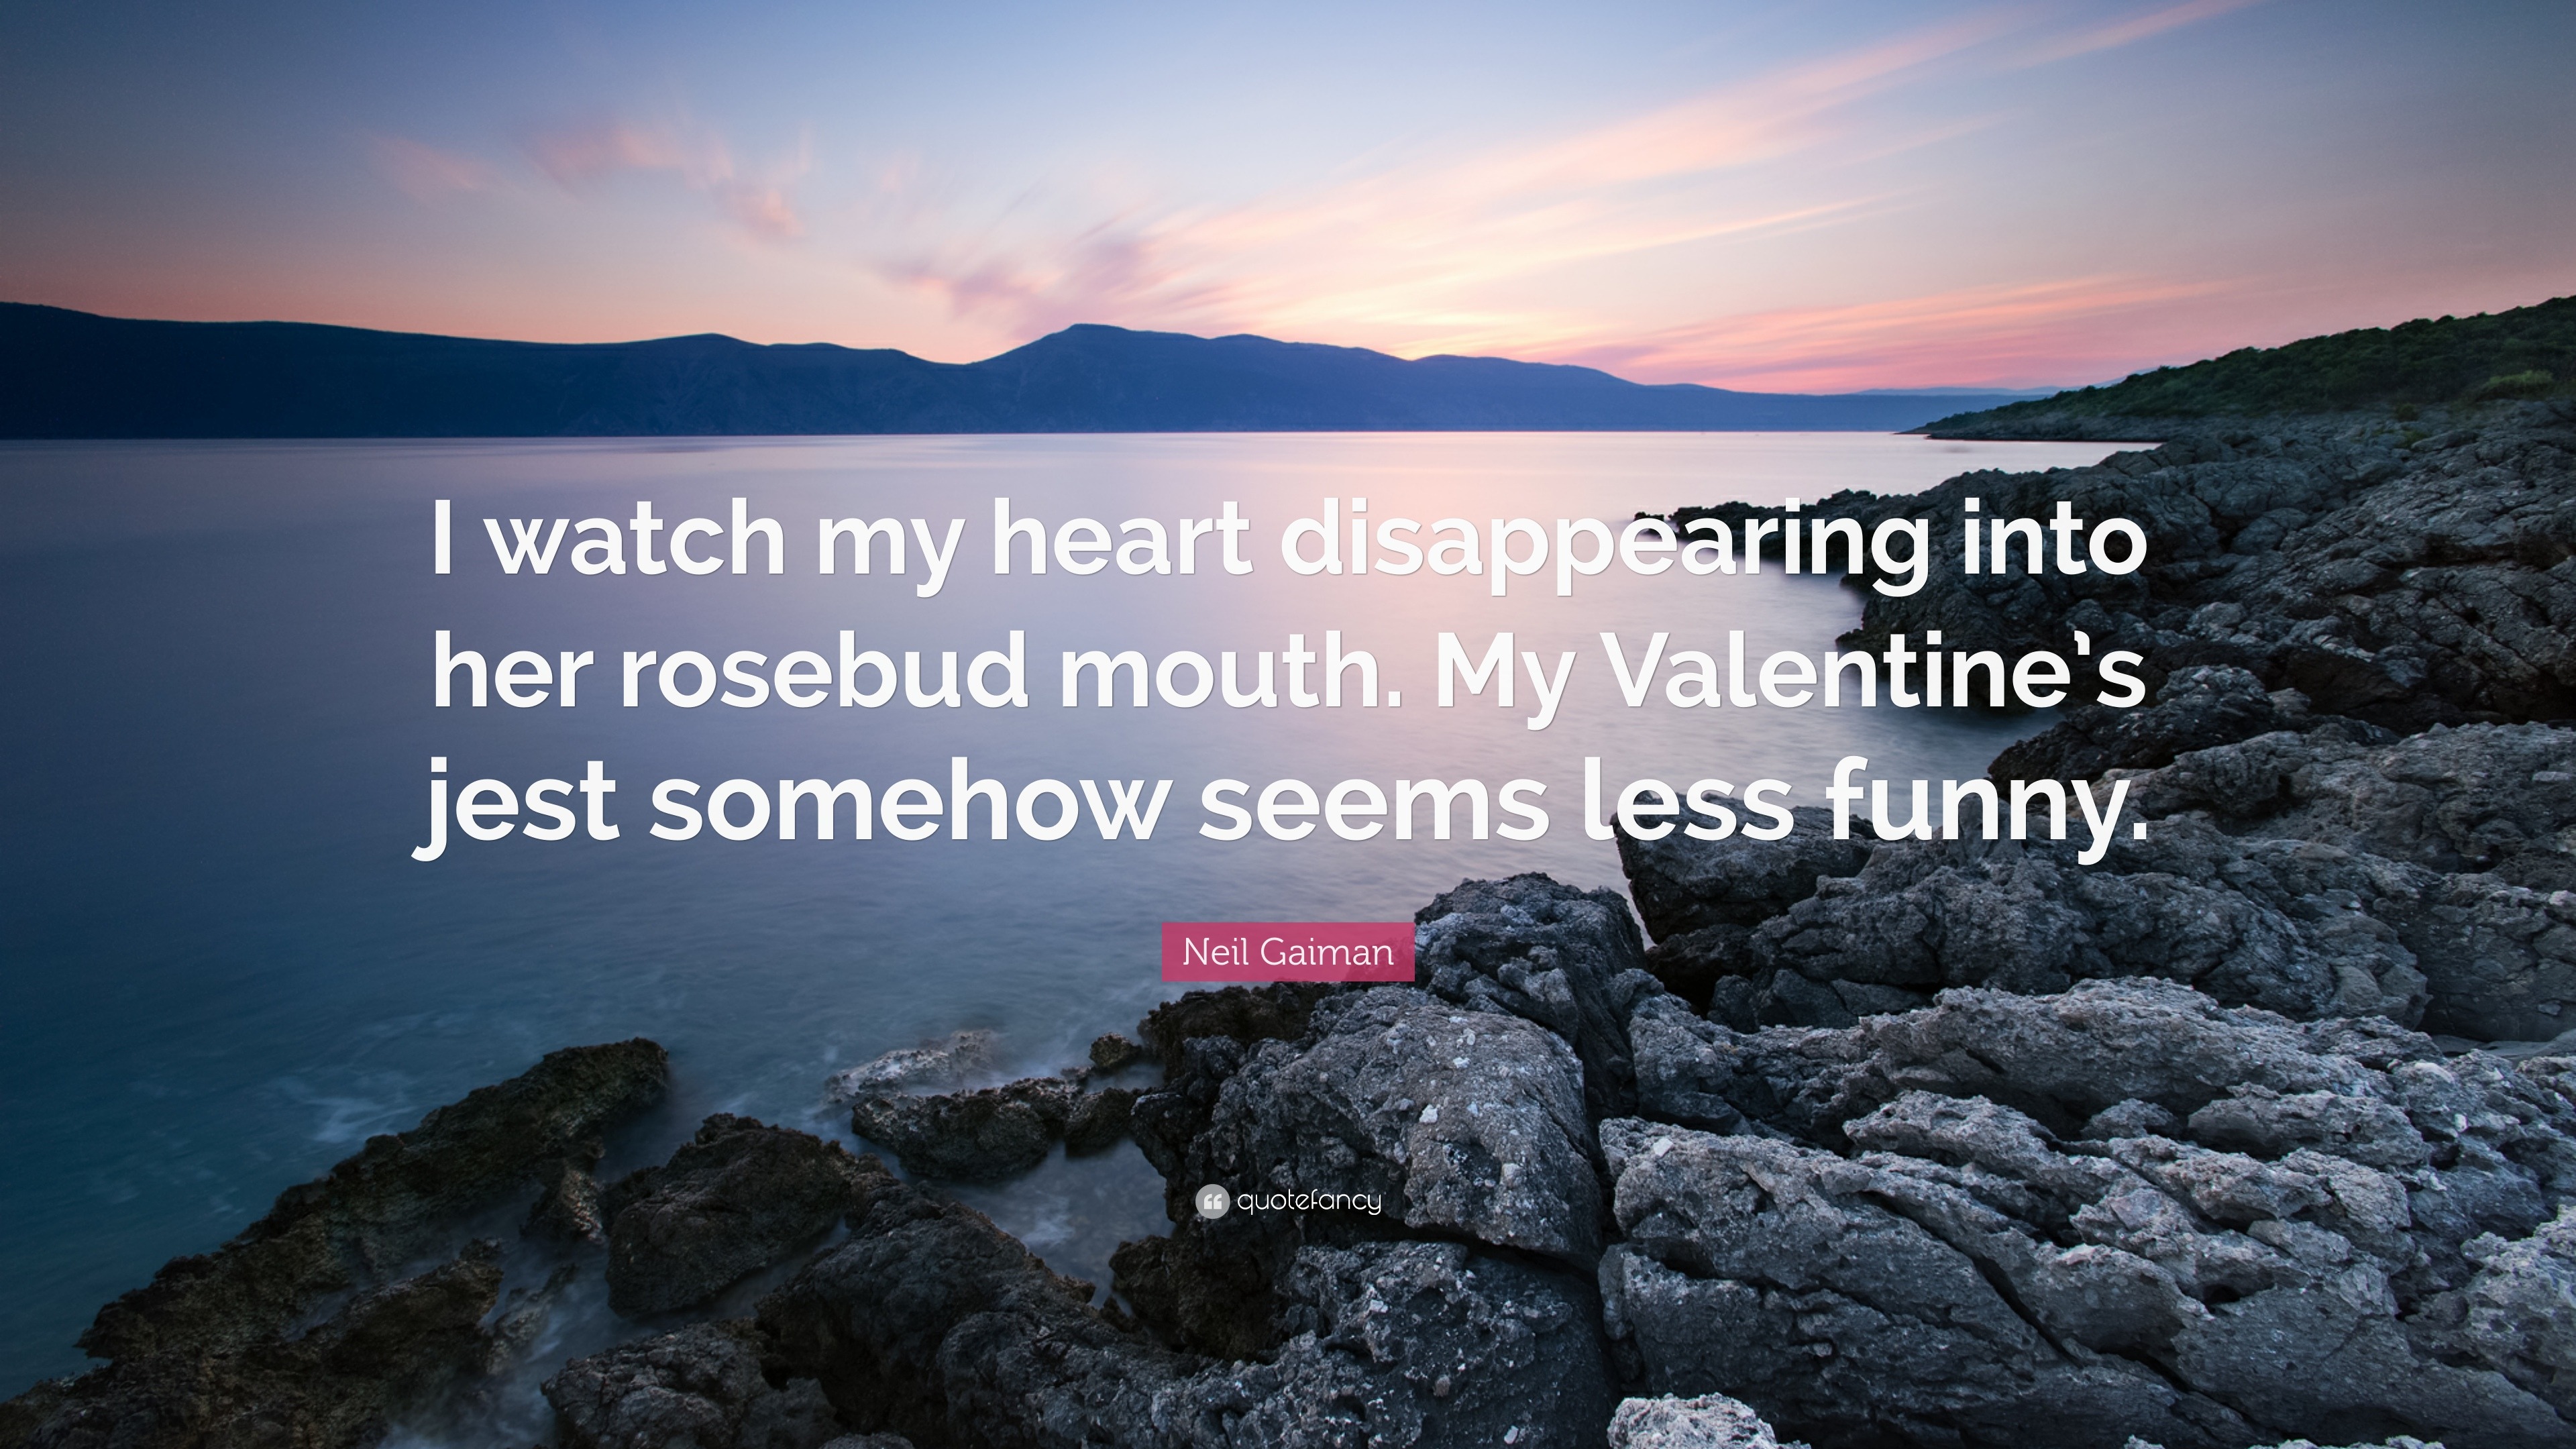 Neil Gaiman Quote: “I watch my heart disappearing into her rosebud mouth.  My Valentine's jest somehow